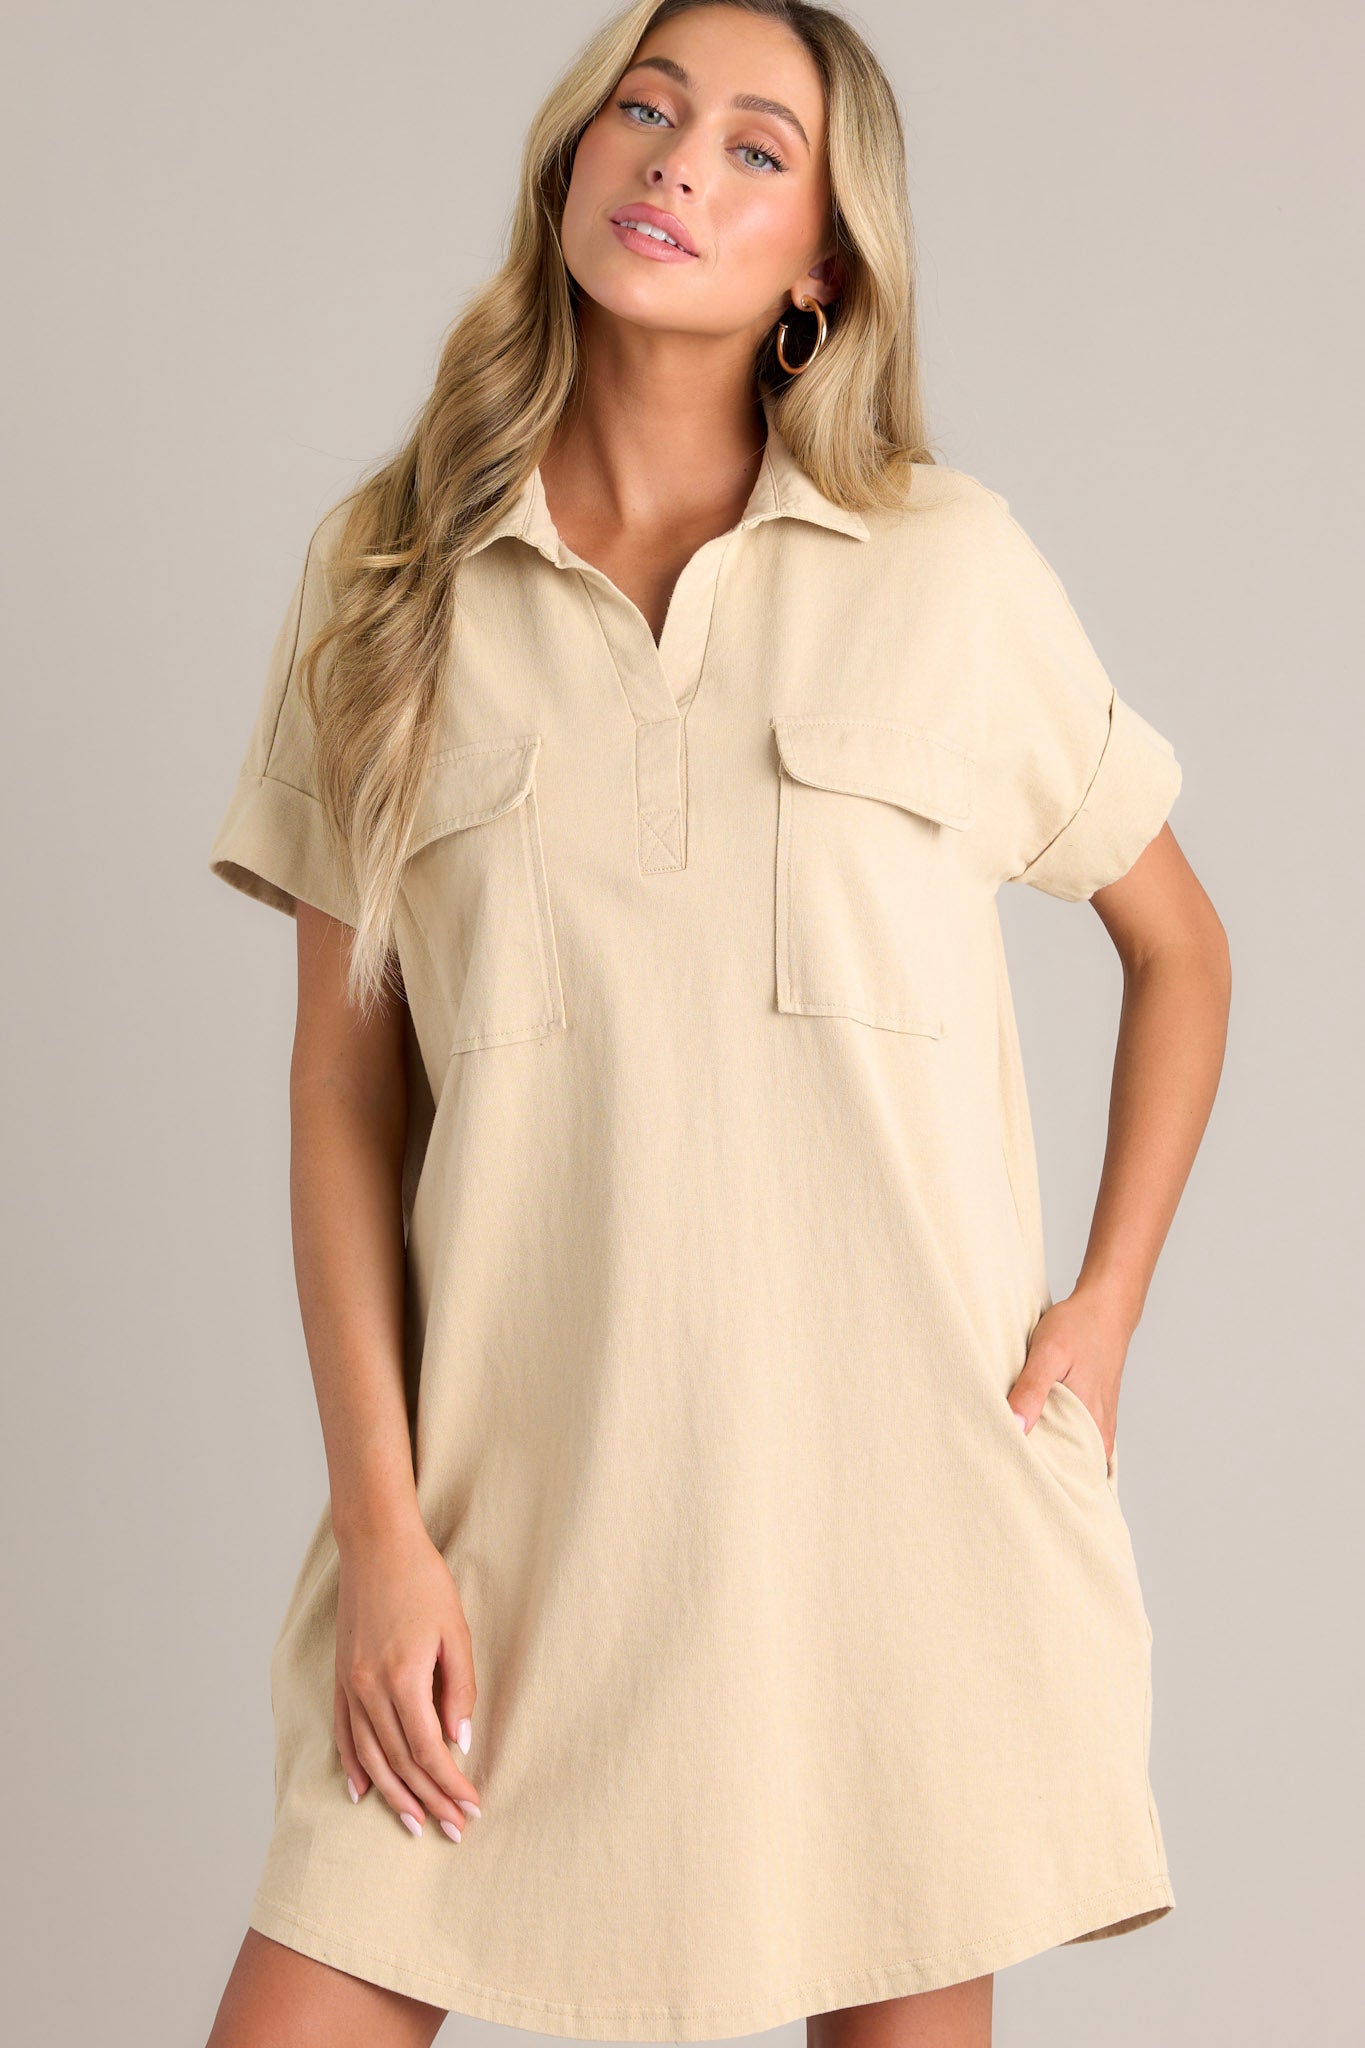 Angled front view of this tan mini dress that features a collared neckline, functional breast & hip pockets, and cuffed short sleeves.